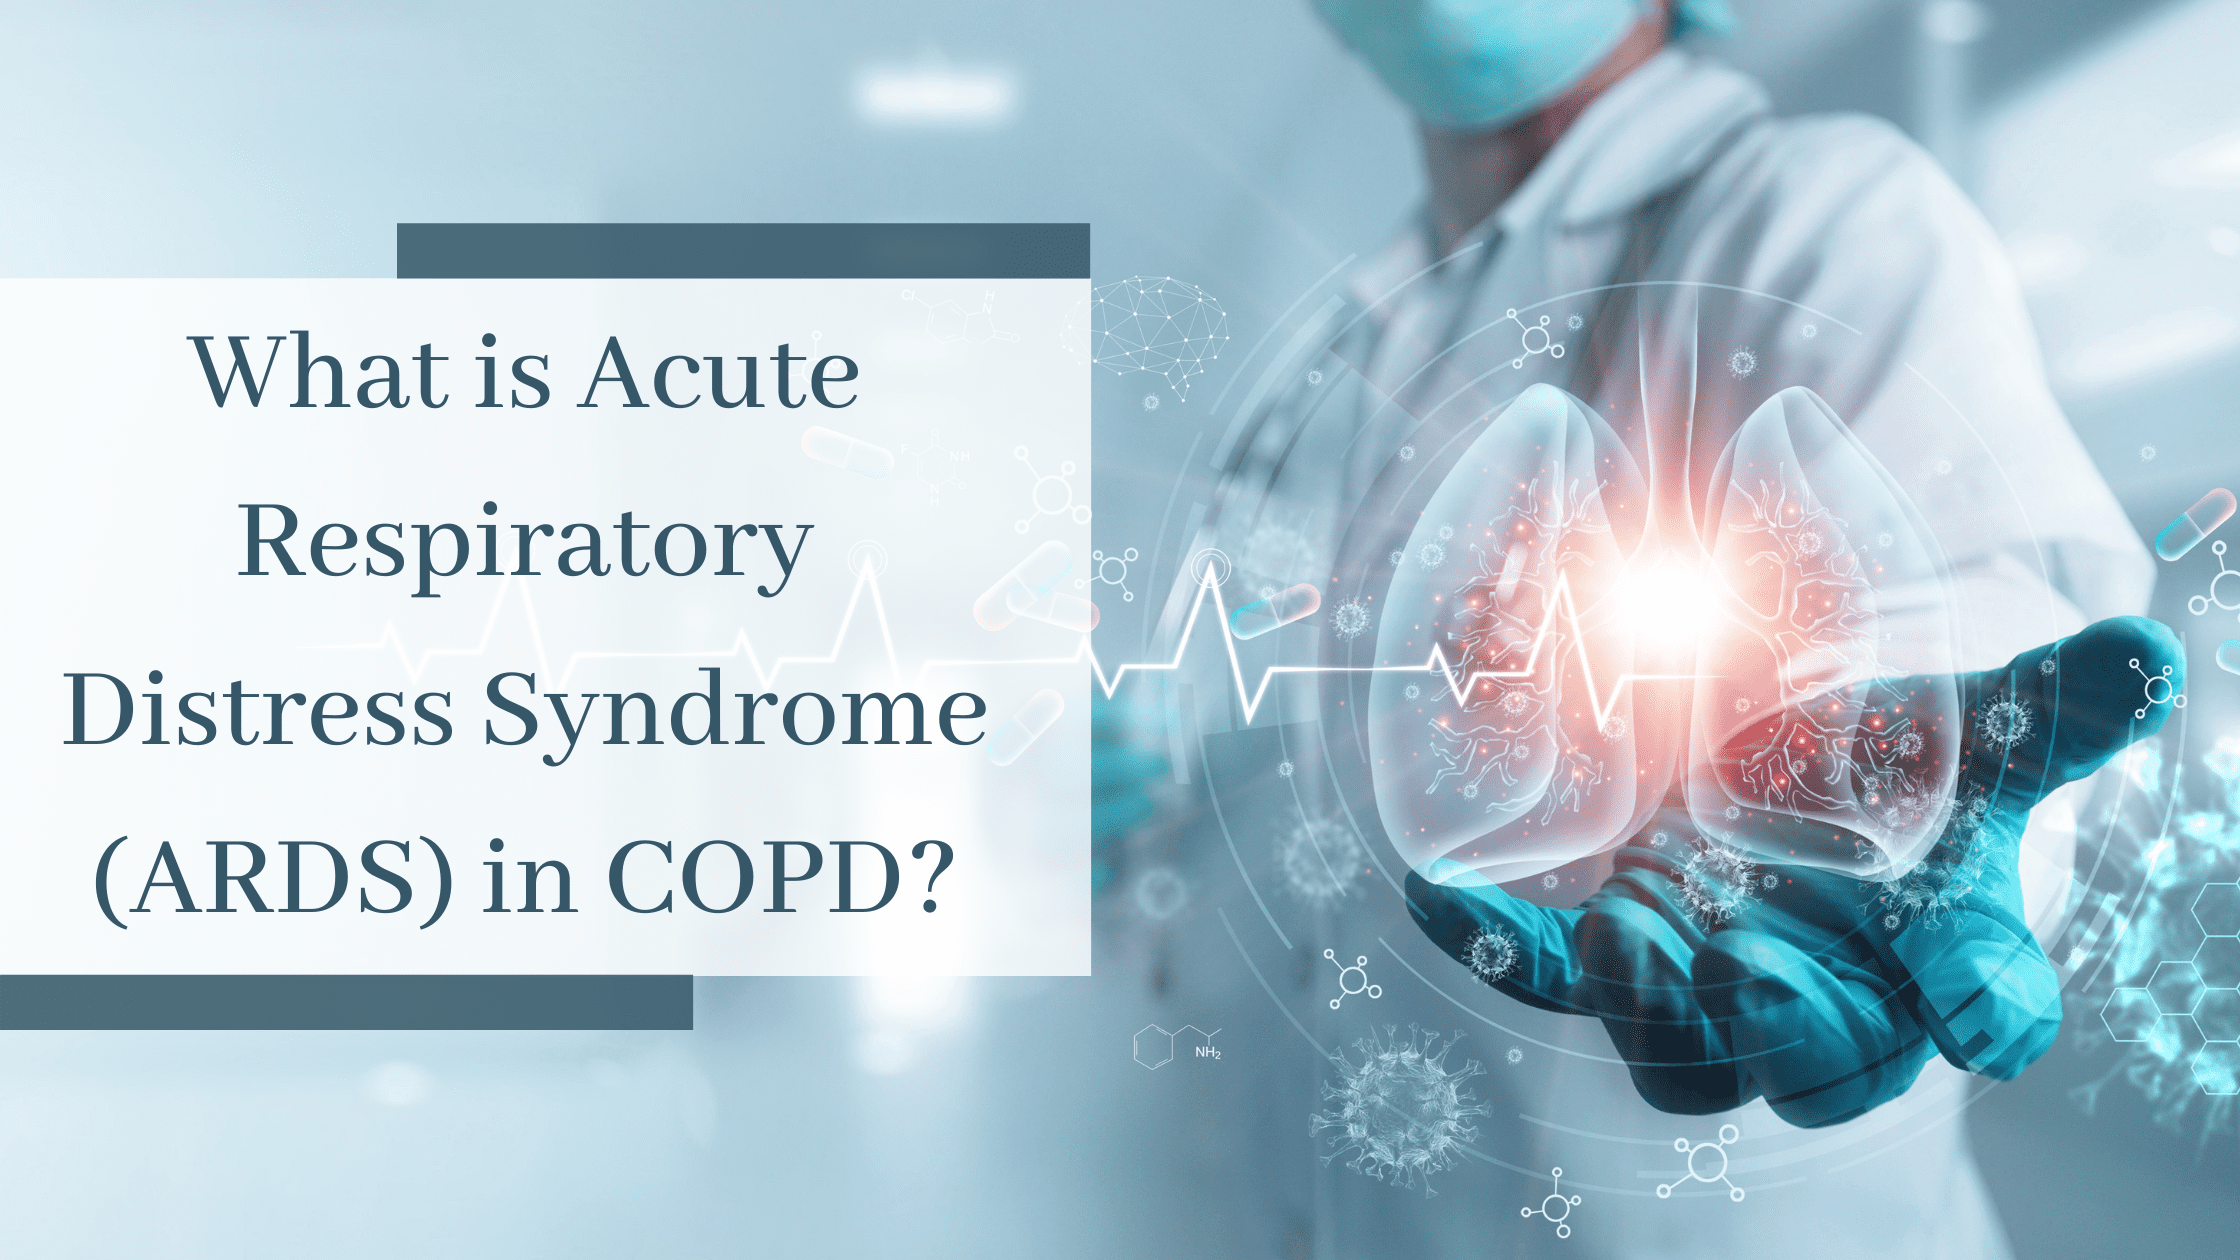 What is Acute Respiratory Distress Syndrome (ARDS) in COPD?